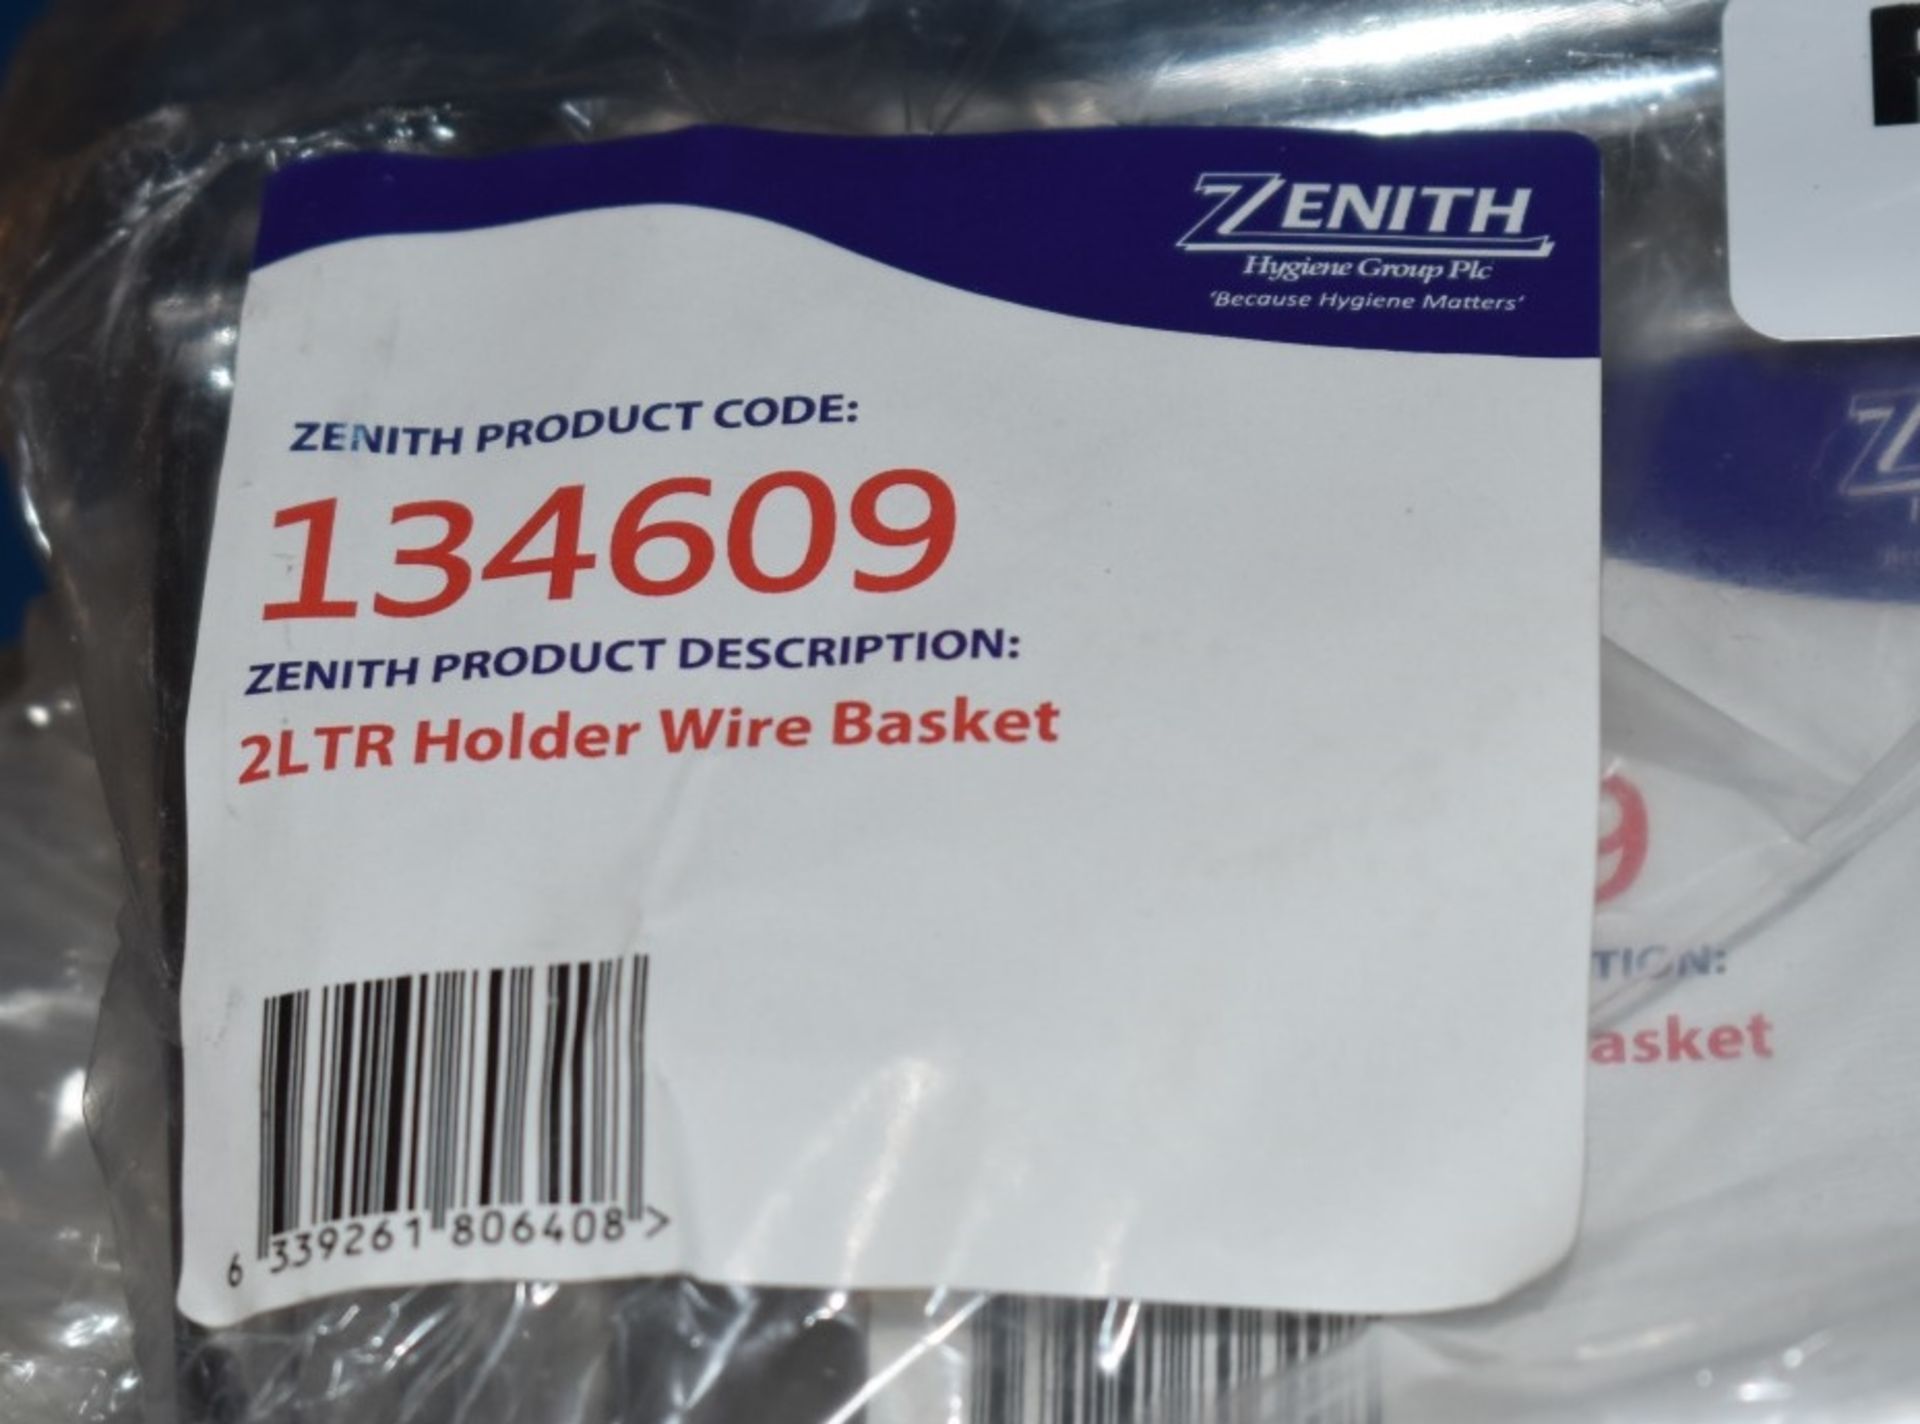 3 x Zenith 2l Holder Wire Baskets - Product Code 134609 - New in Packets - Ref: RB181 - CL558 - - Image 2 of 2